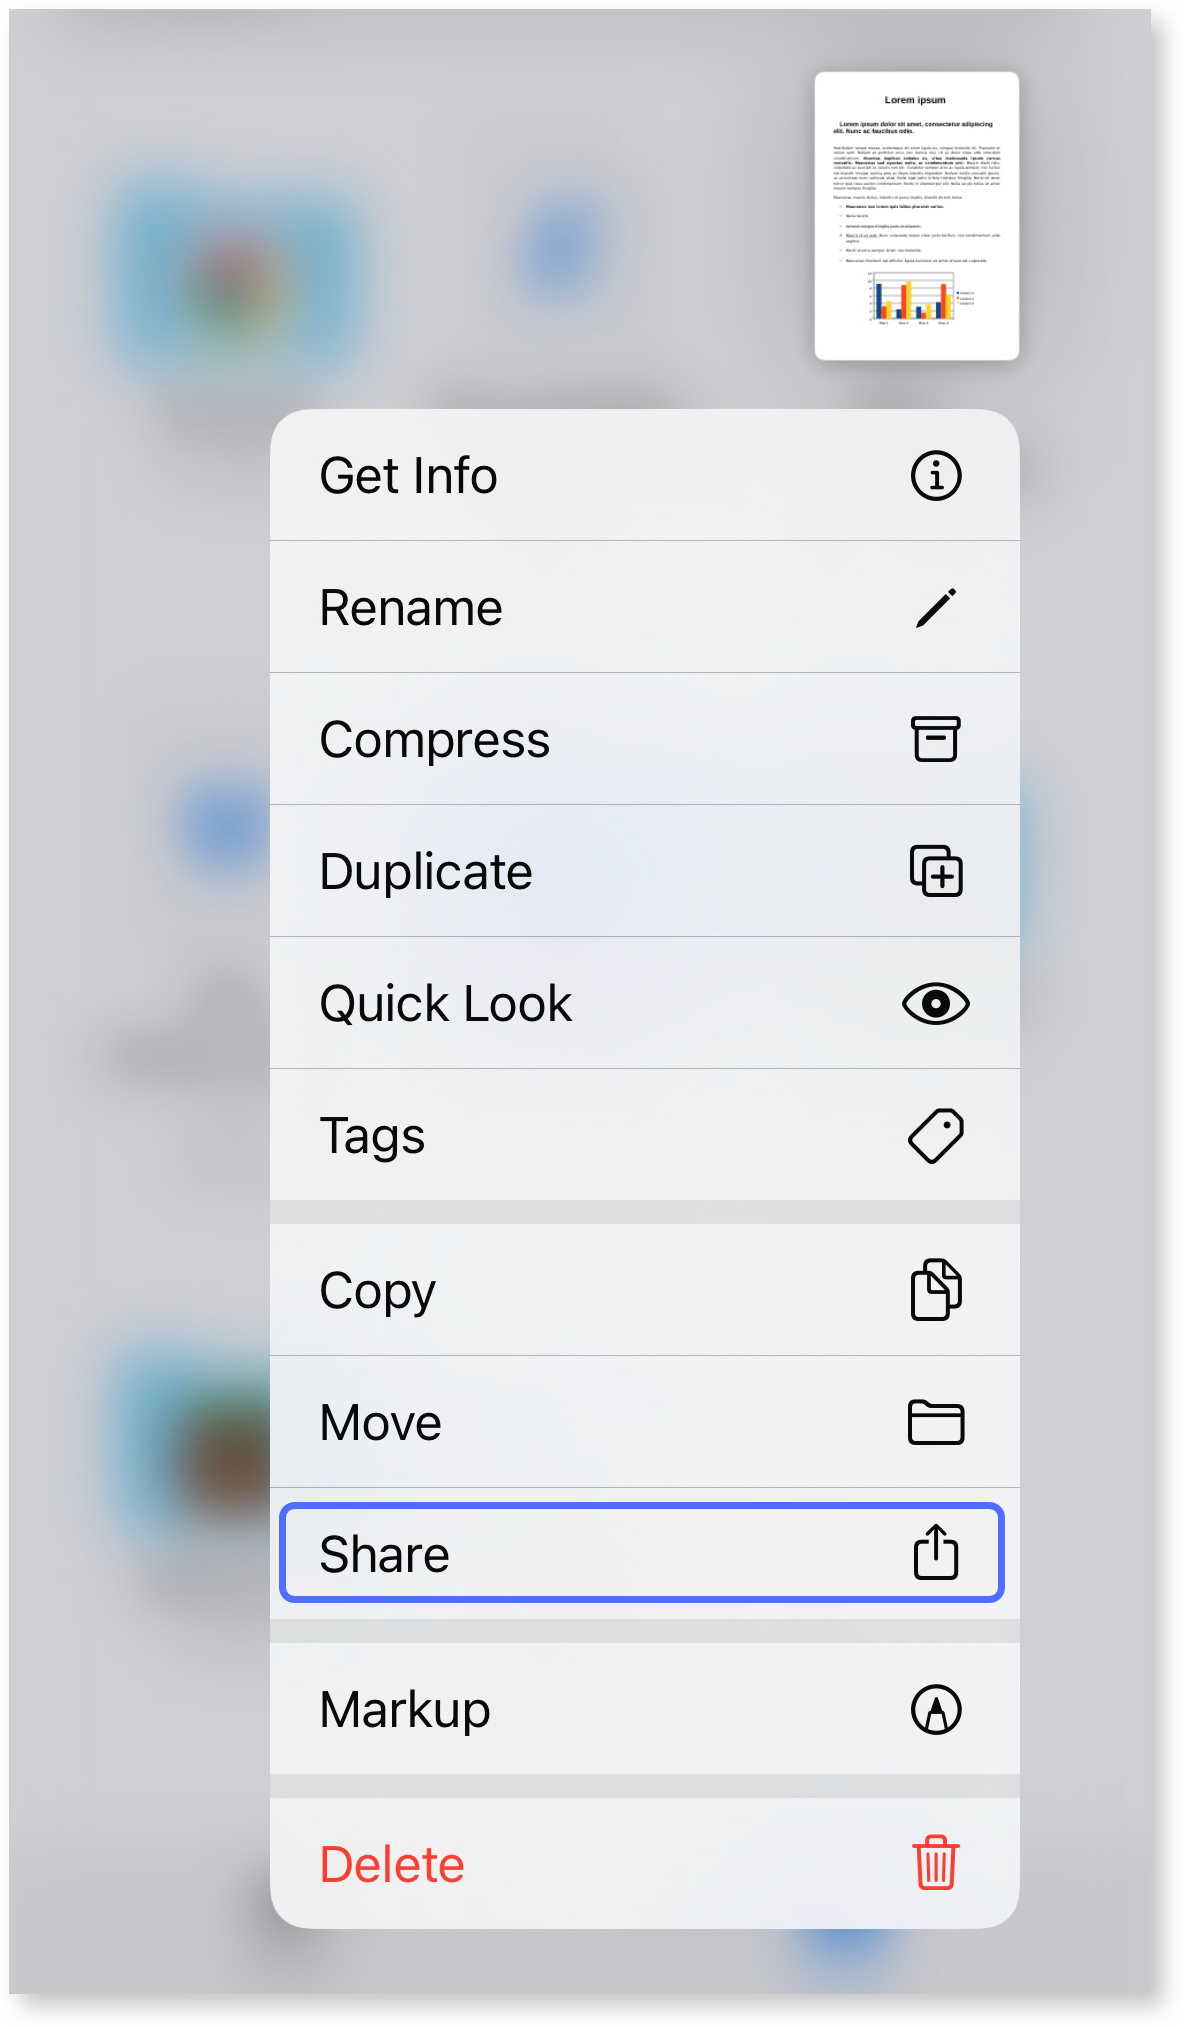 The Share option is highlighted